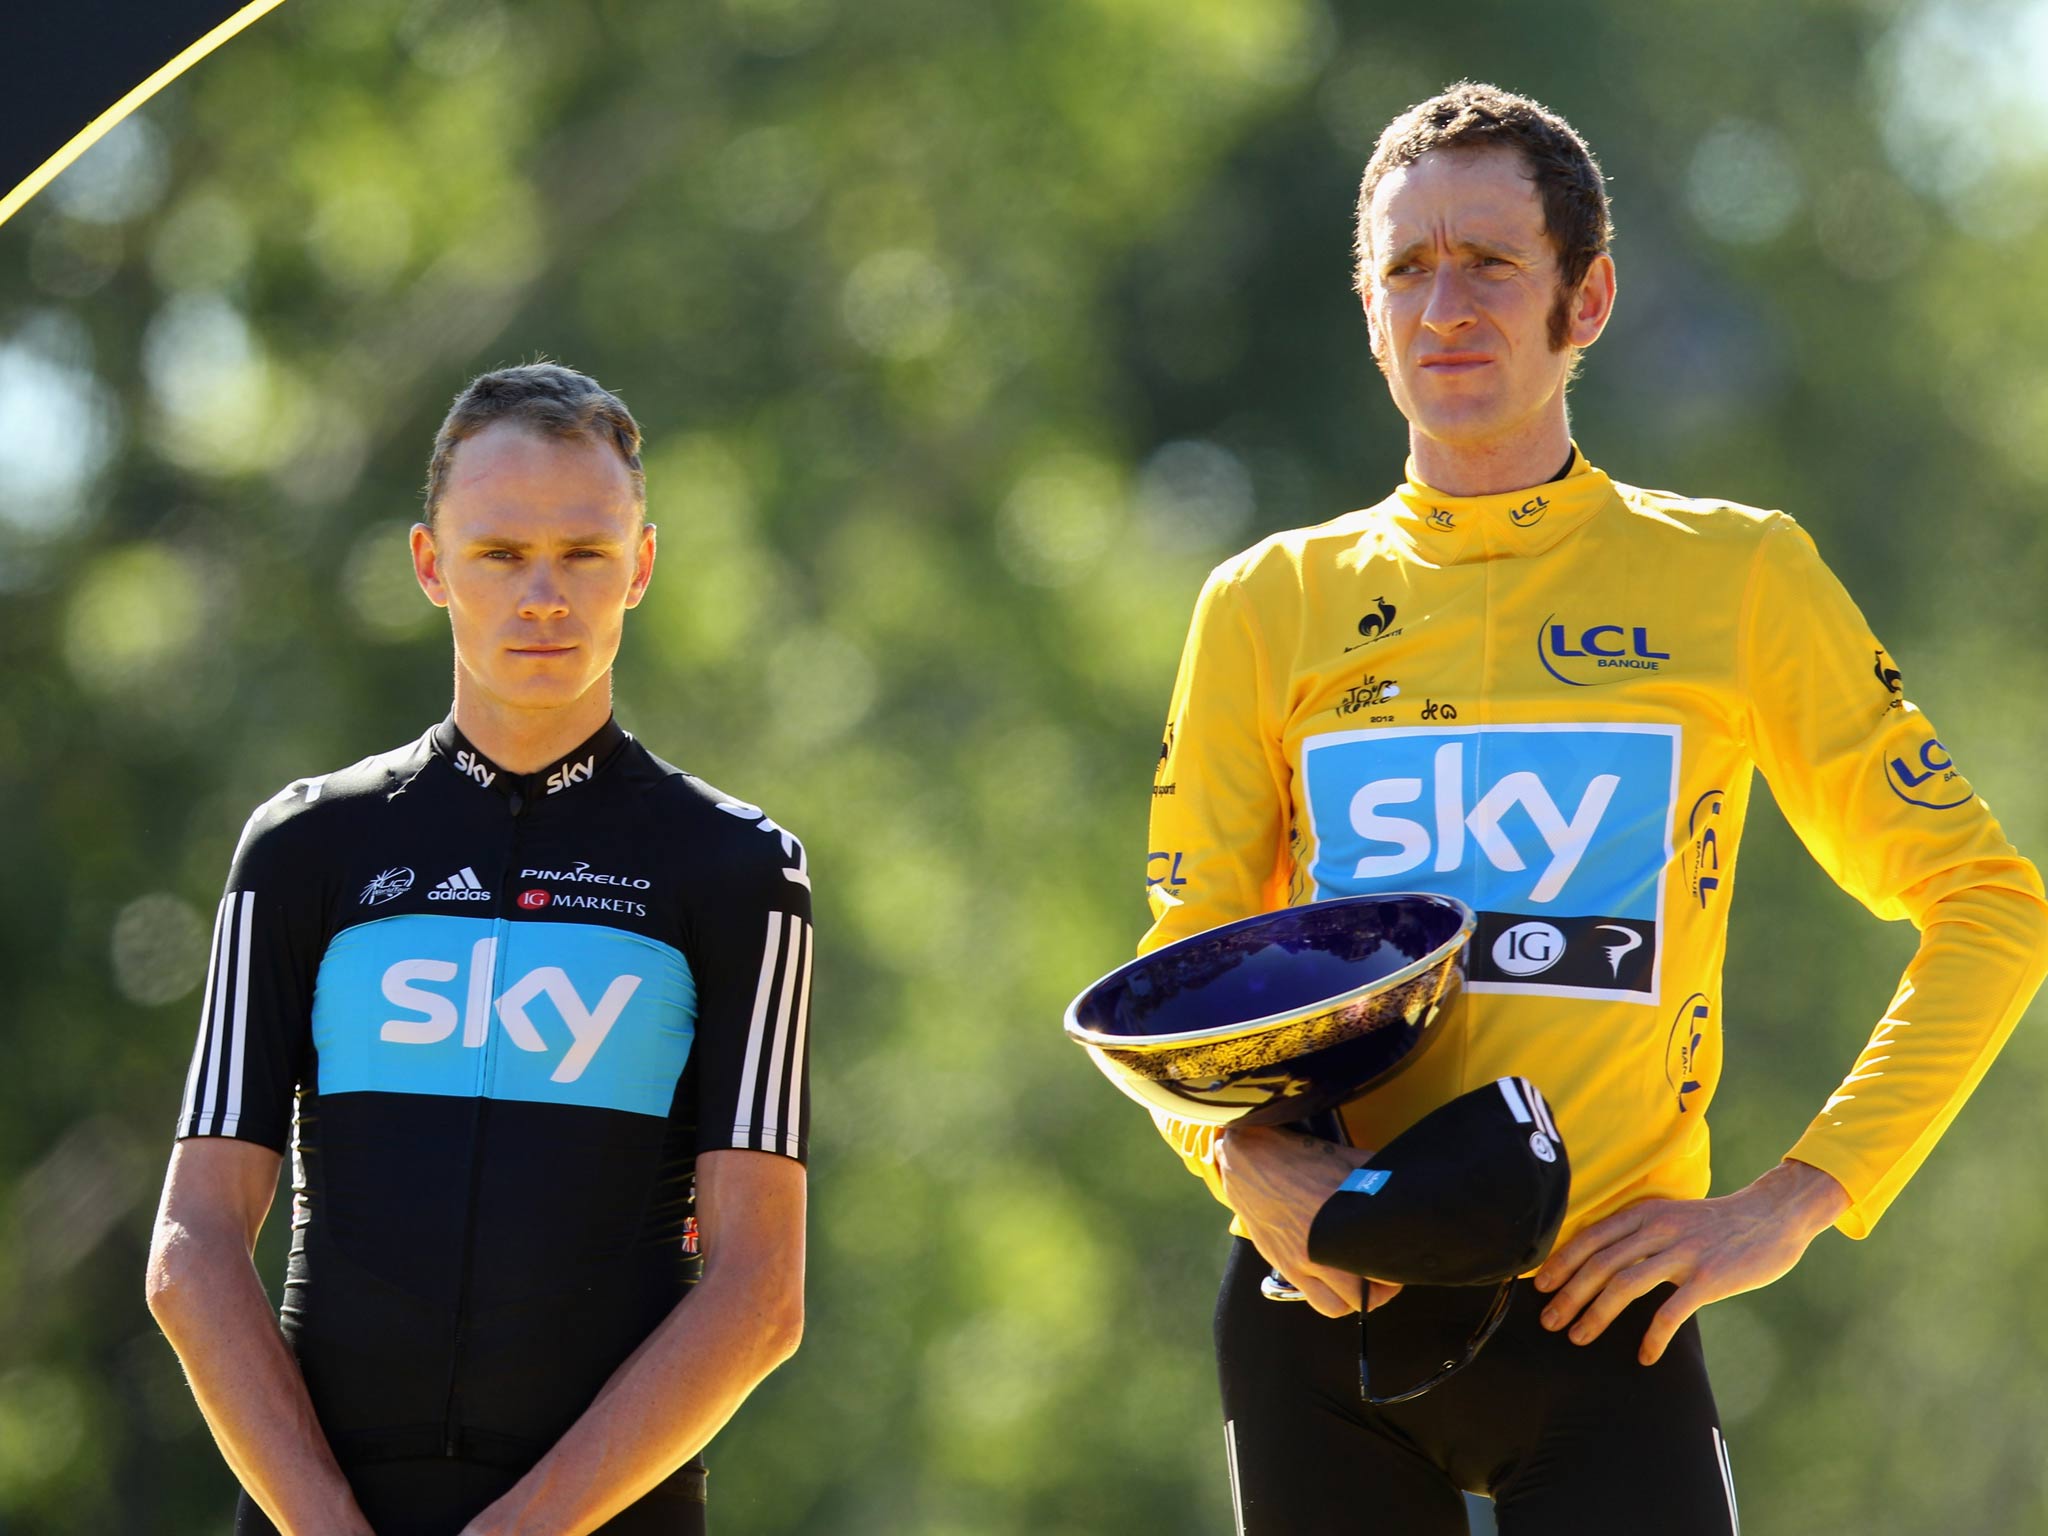 Bradley Wiggins v Chris Froome Tensions between the two came to a head during Wiggins' triumph at last summer's Tour de France. With Froome instructed by Team Sky to hold back for the eventual winner, the 27-year-old ignored it and raced up to